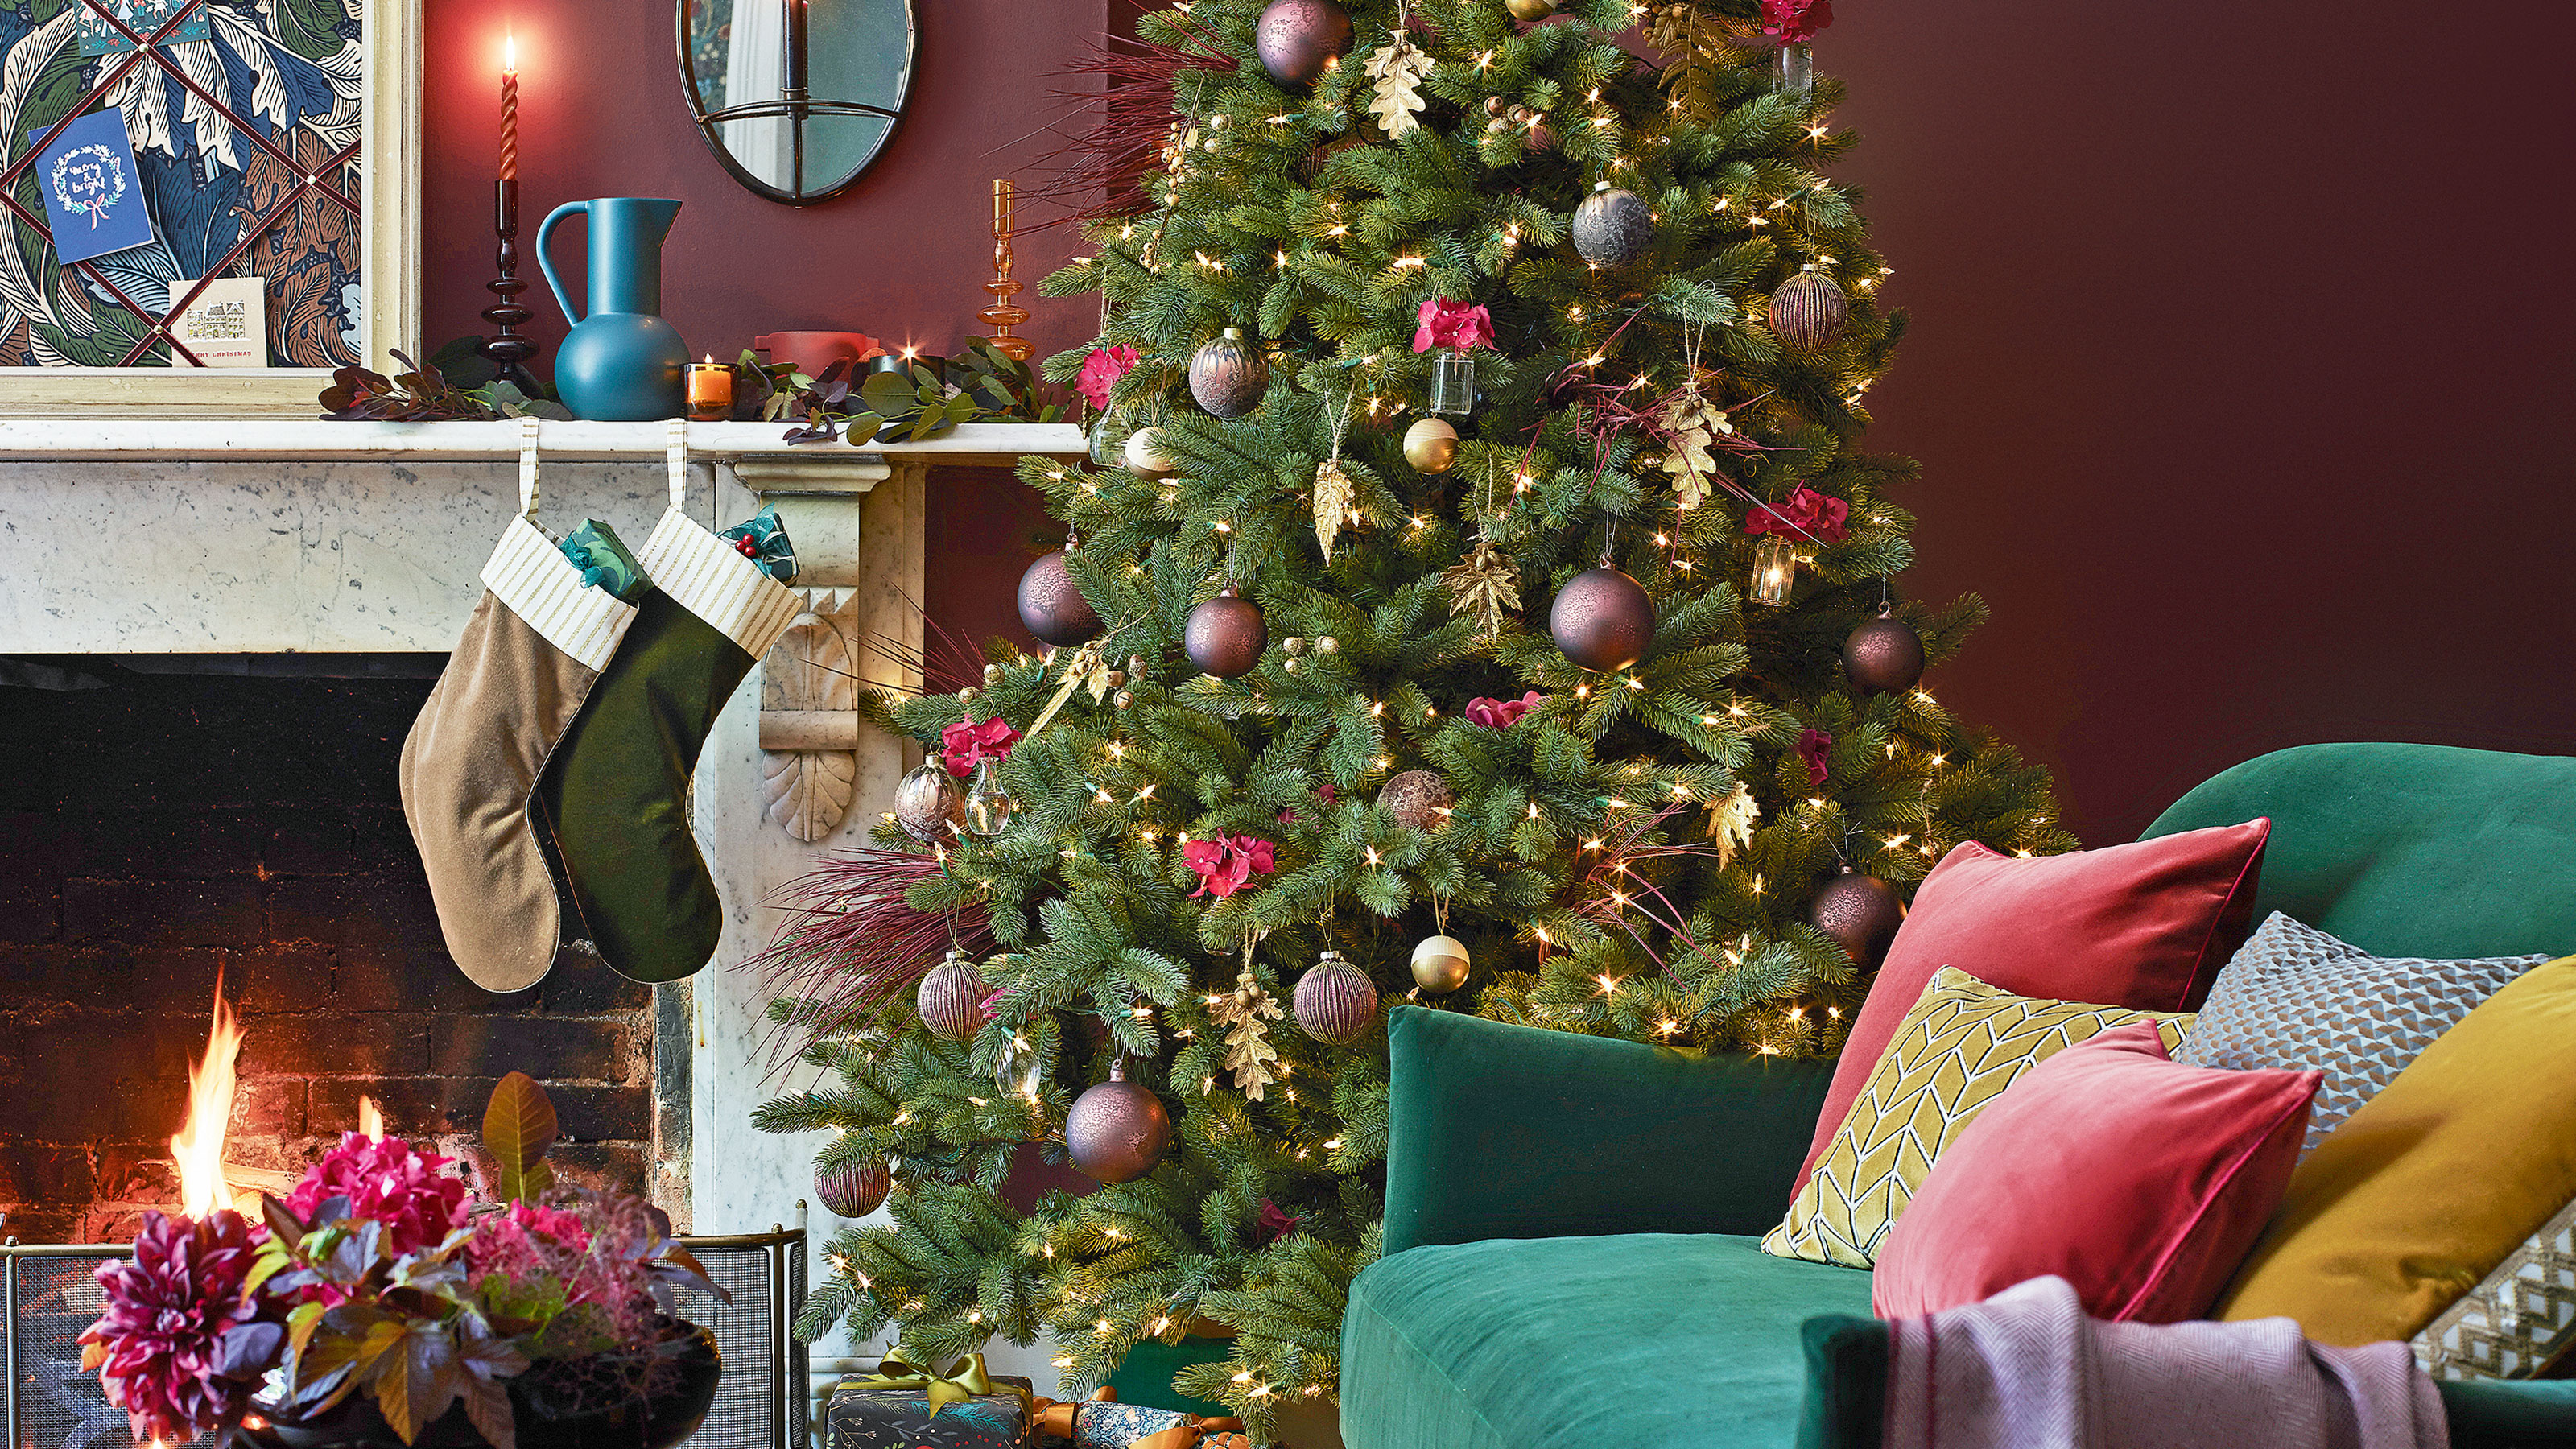 Decorate Your Christmas Tree With My 24 Expert Tips, 55% OFF